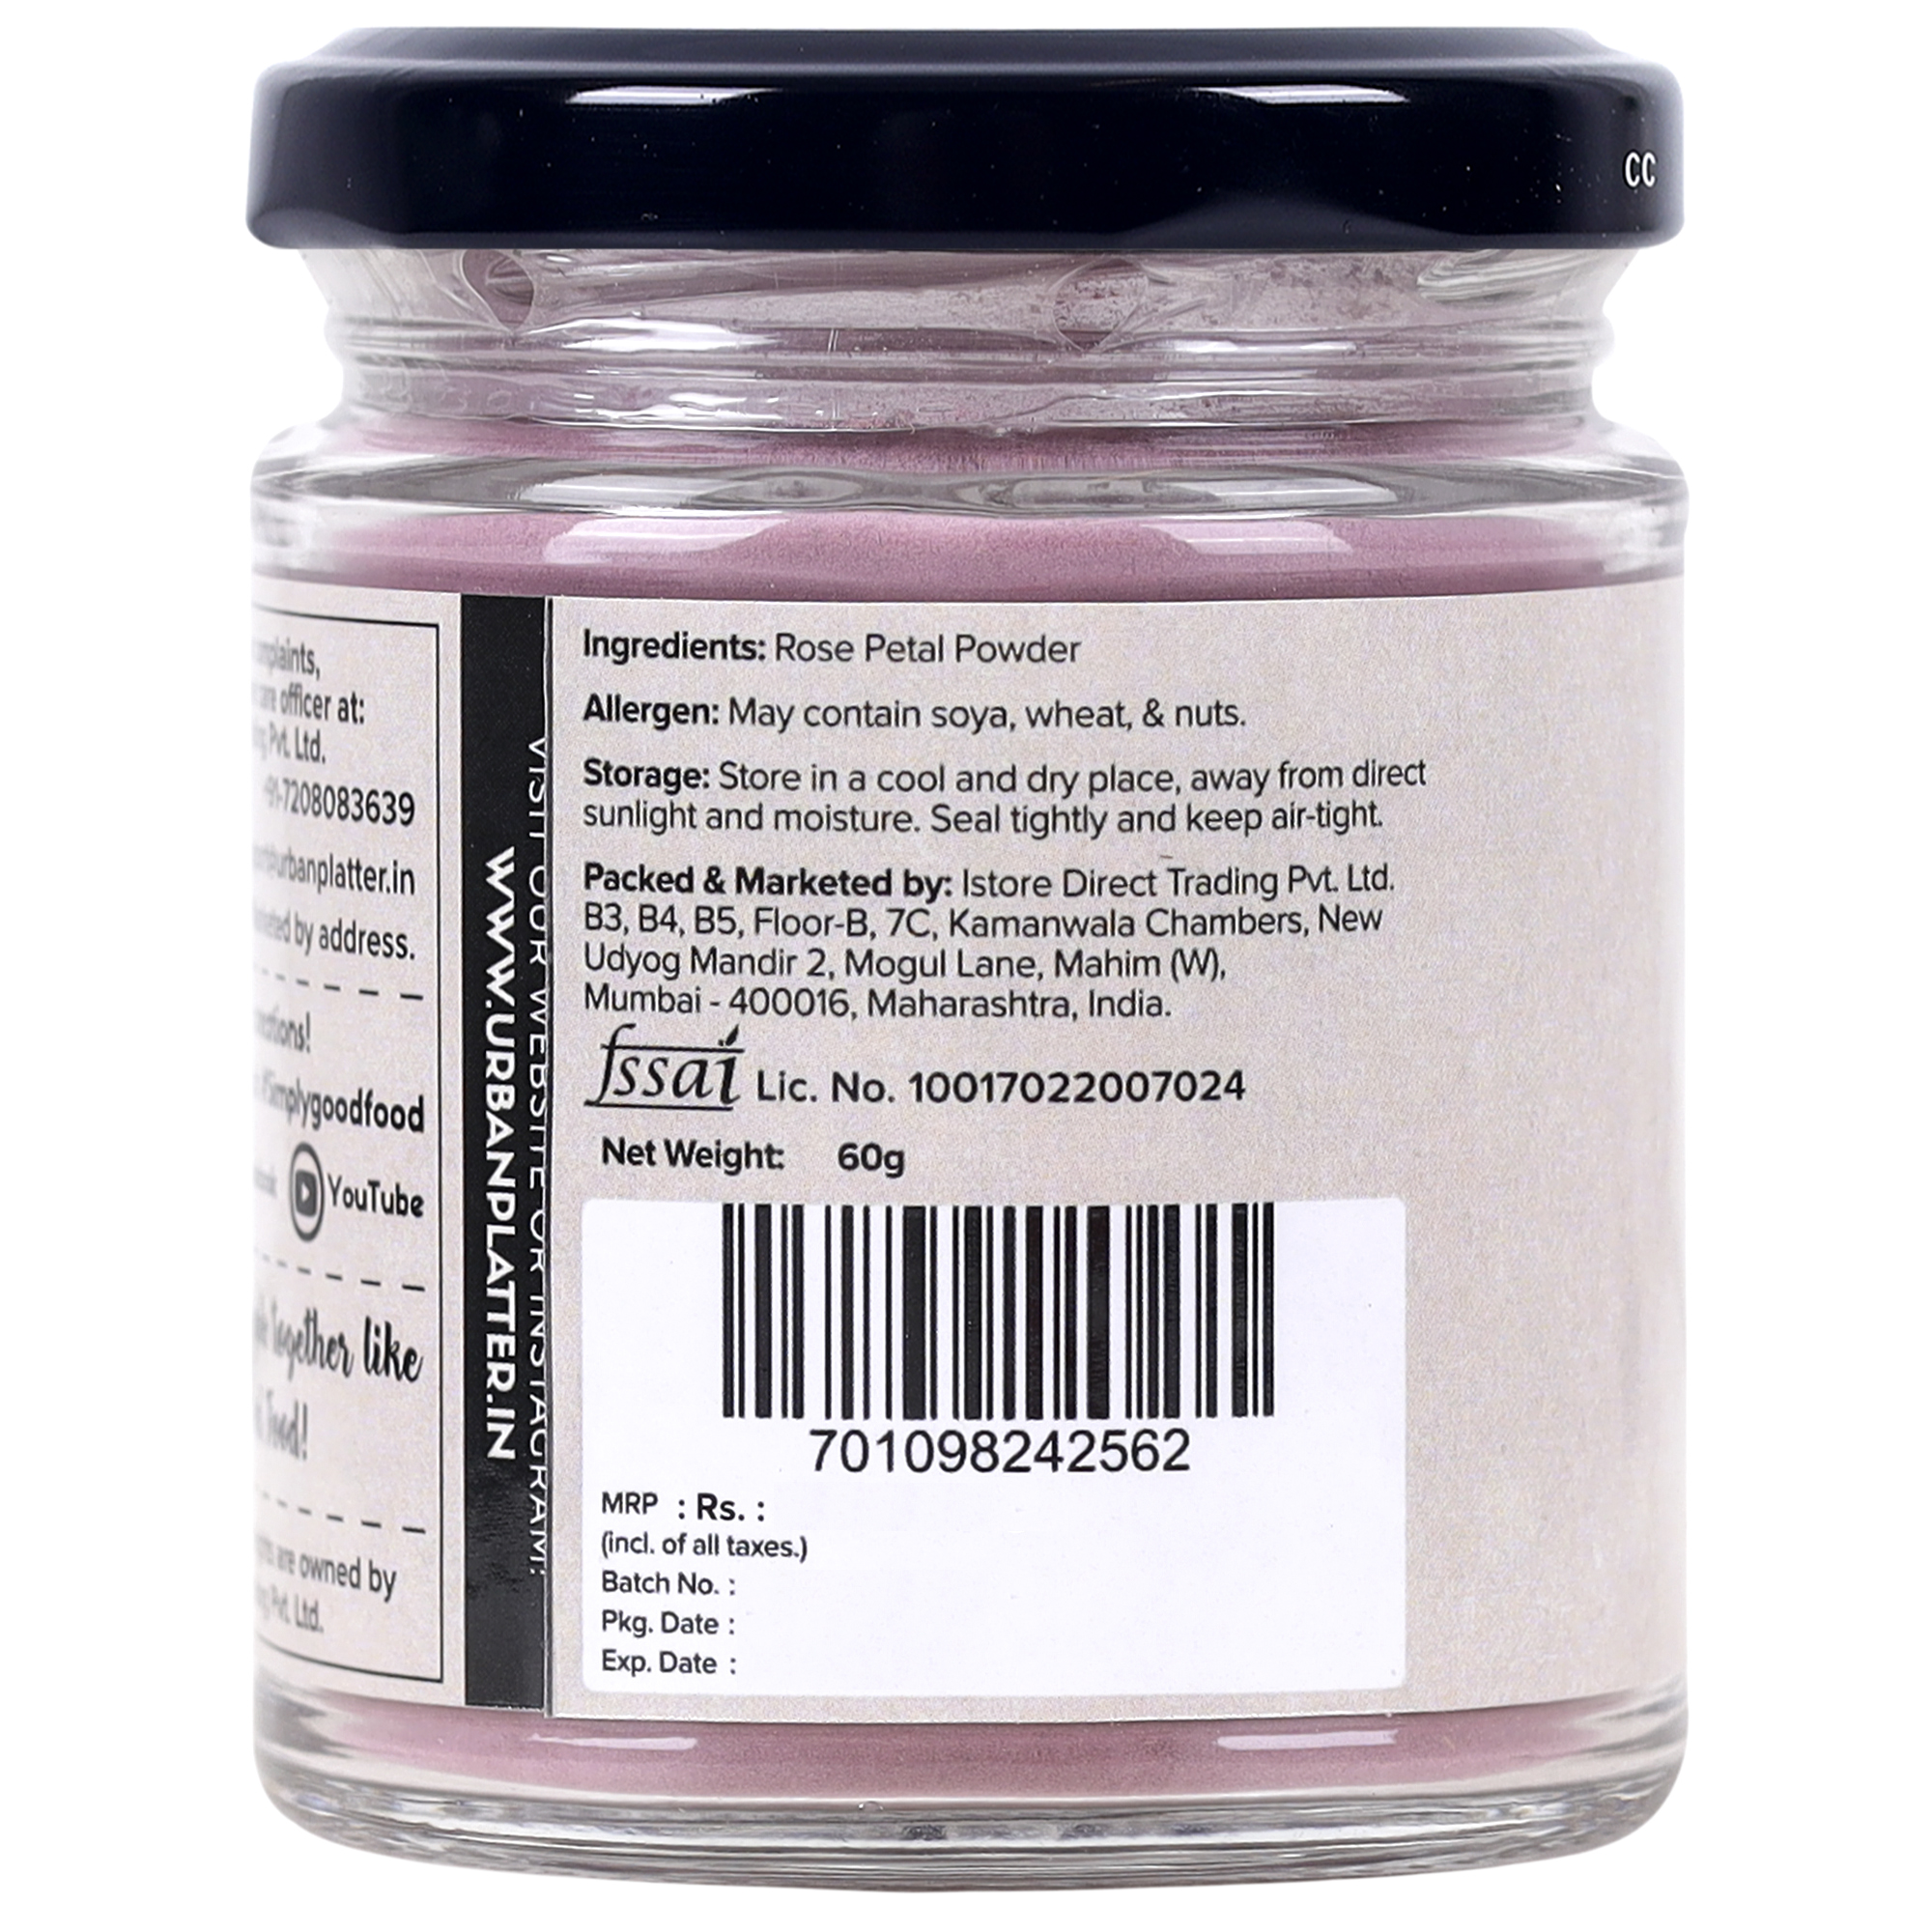 Dulux Powder Rose Precisely Matched For Paint and Spray Paint